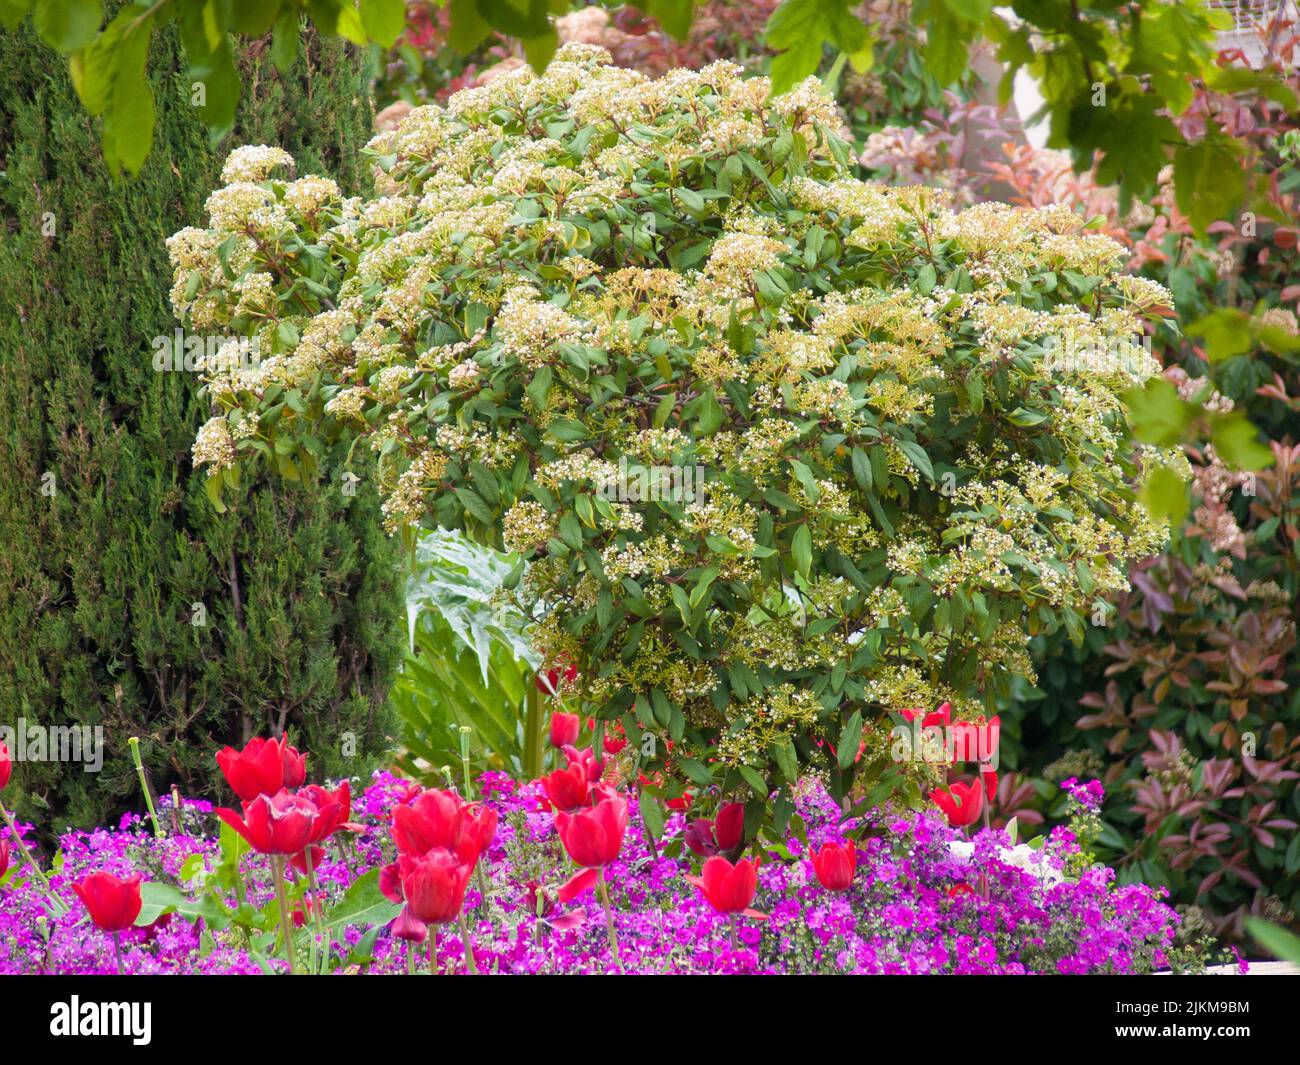 A beautiful view of colorful flowers in Parc Phoenix, Nice, French Riviera, Alpes-Maritimes, France Stock Photo